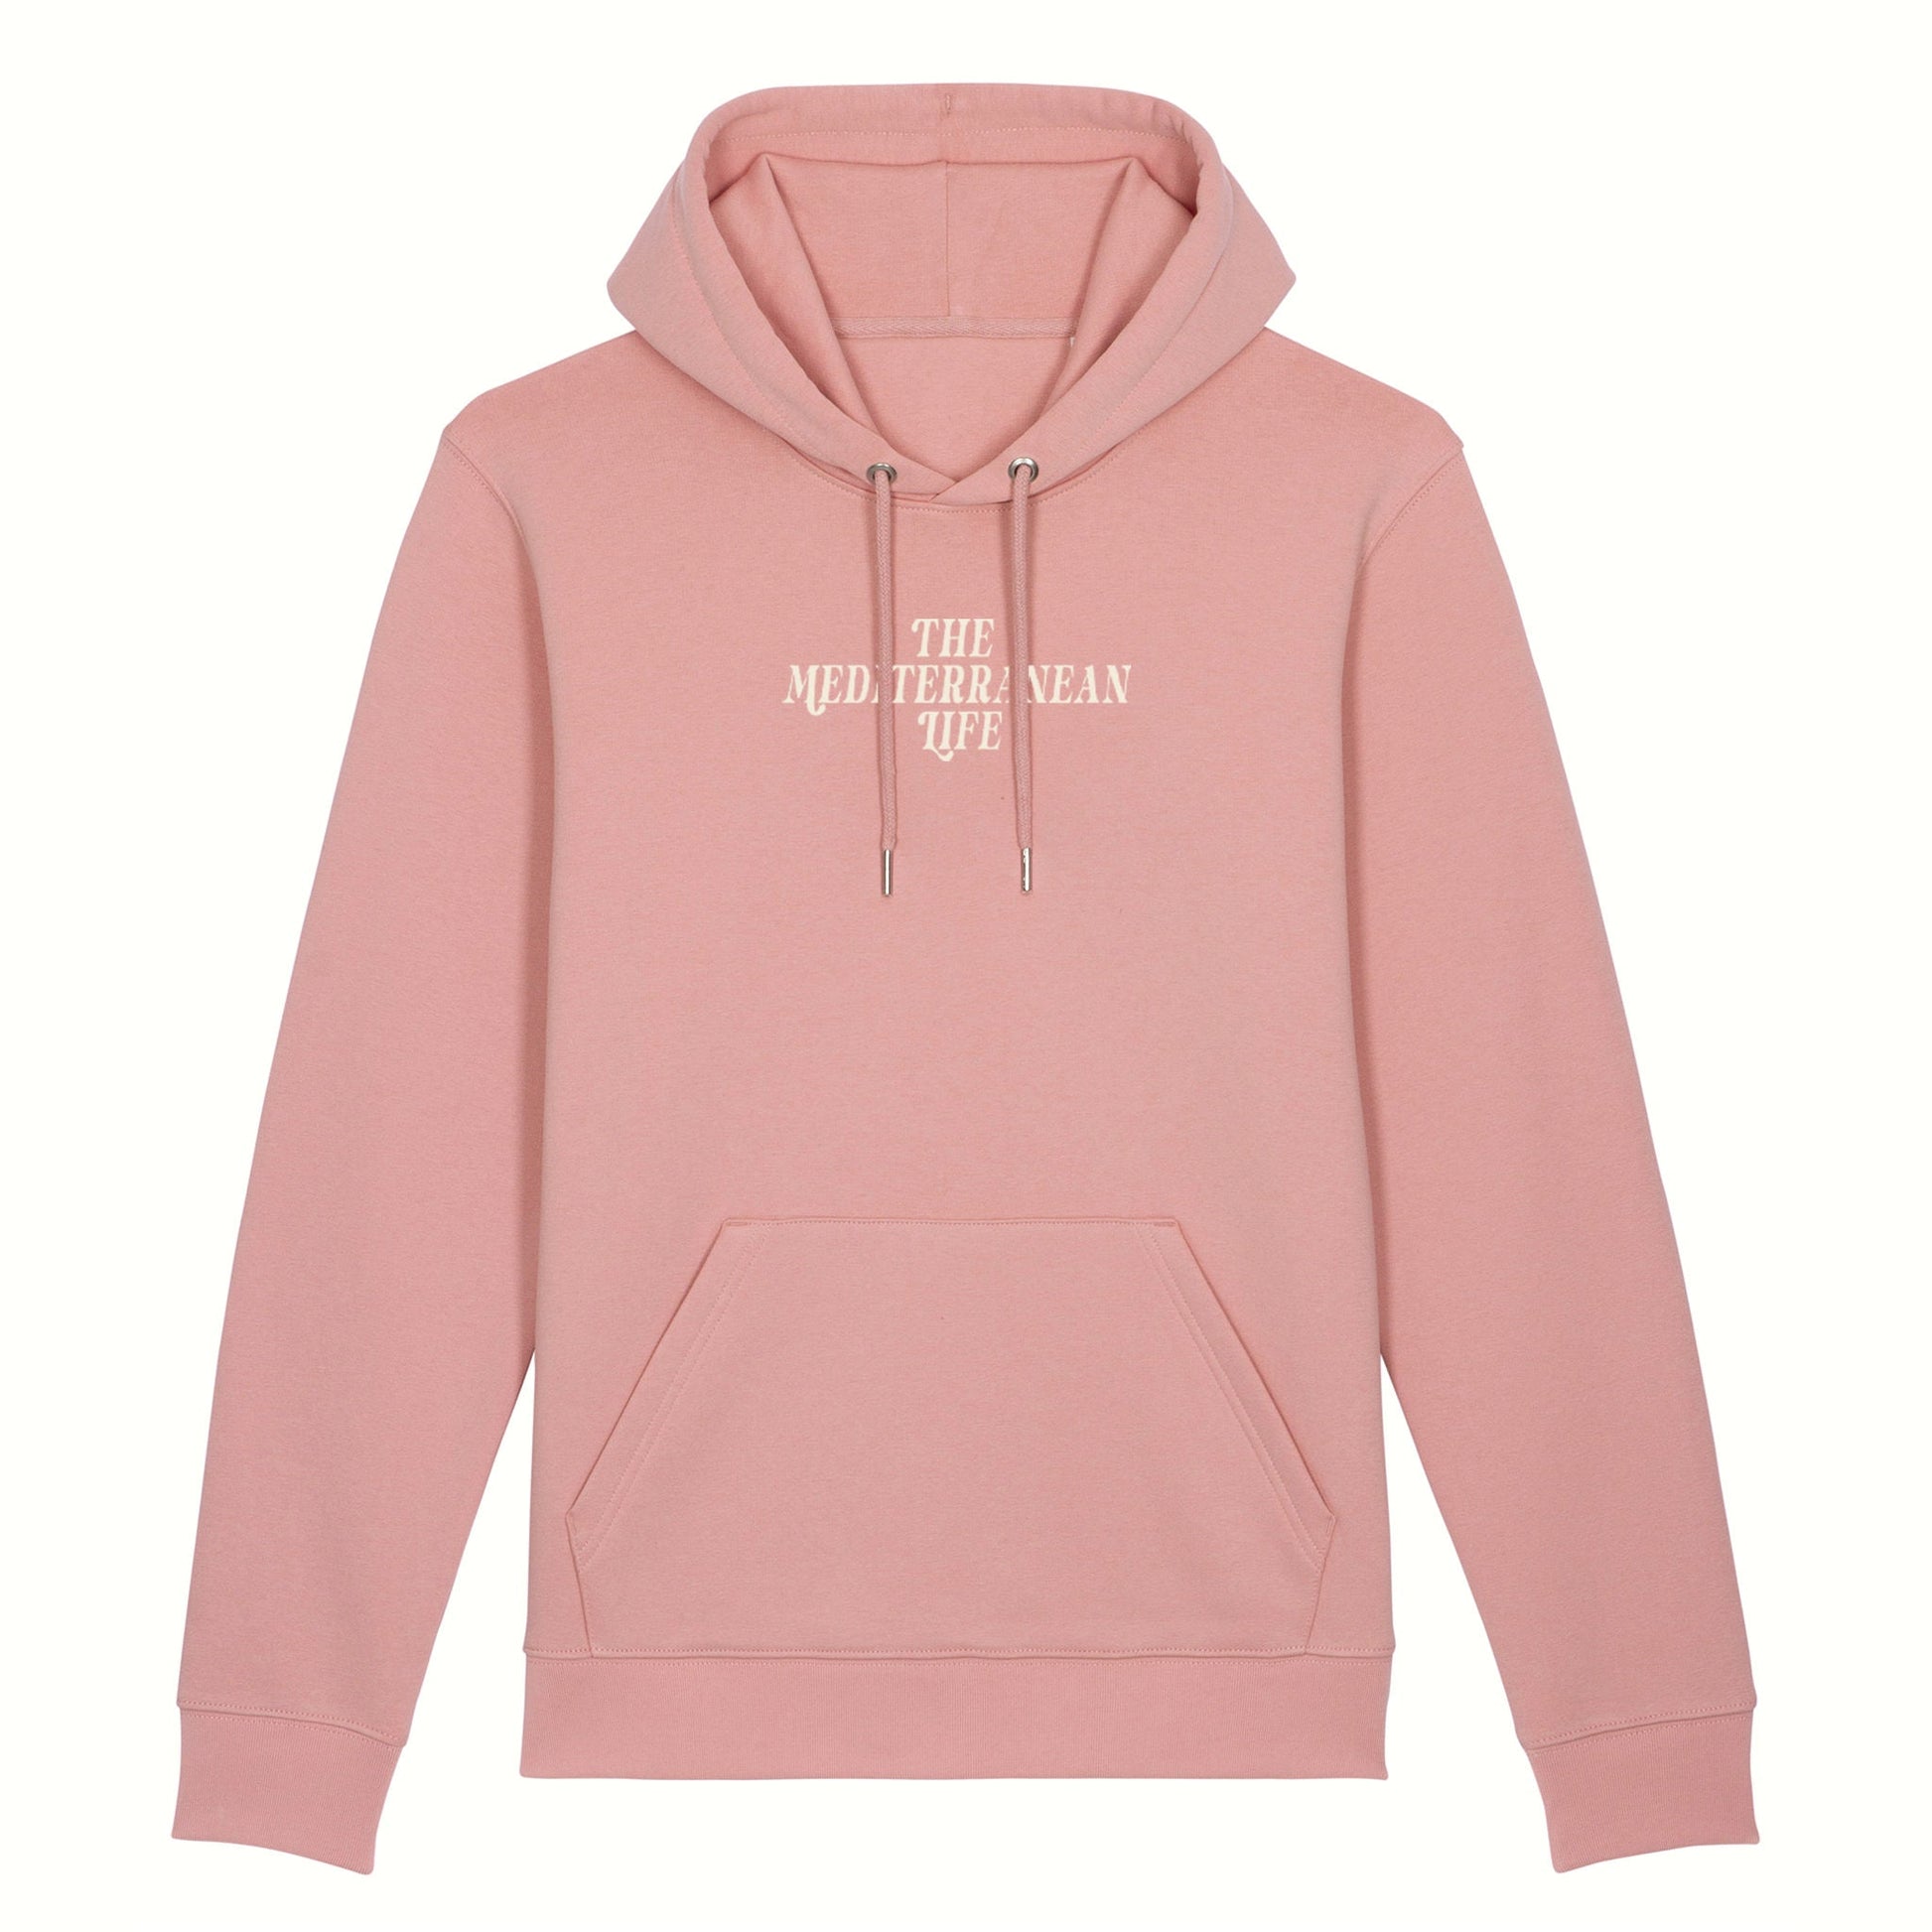 Fear the ordinary pastel pink premium organic cotton hoodie with cream adventure inspired front print.